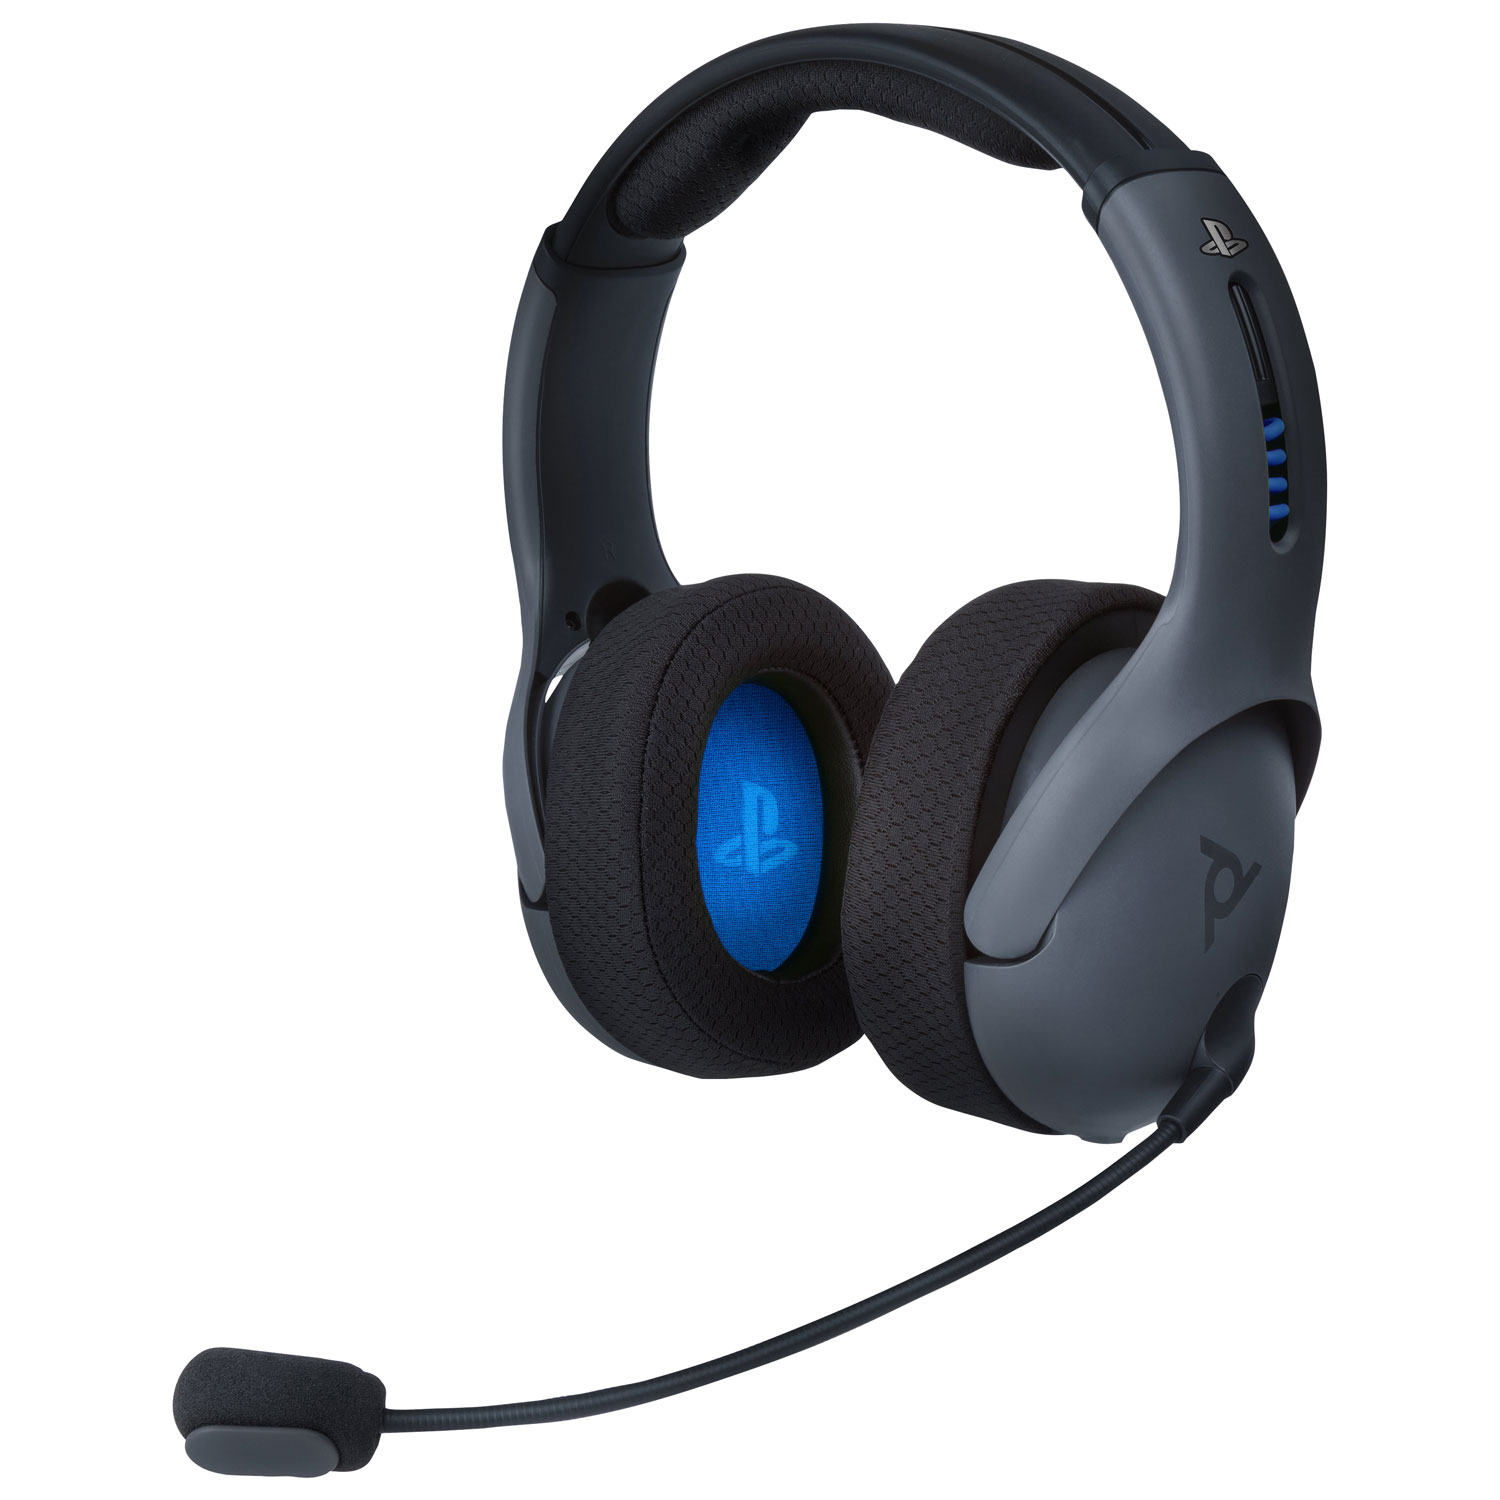 playstation 4 headset with mic